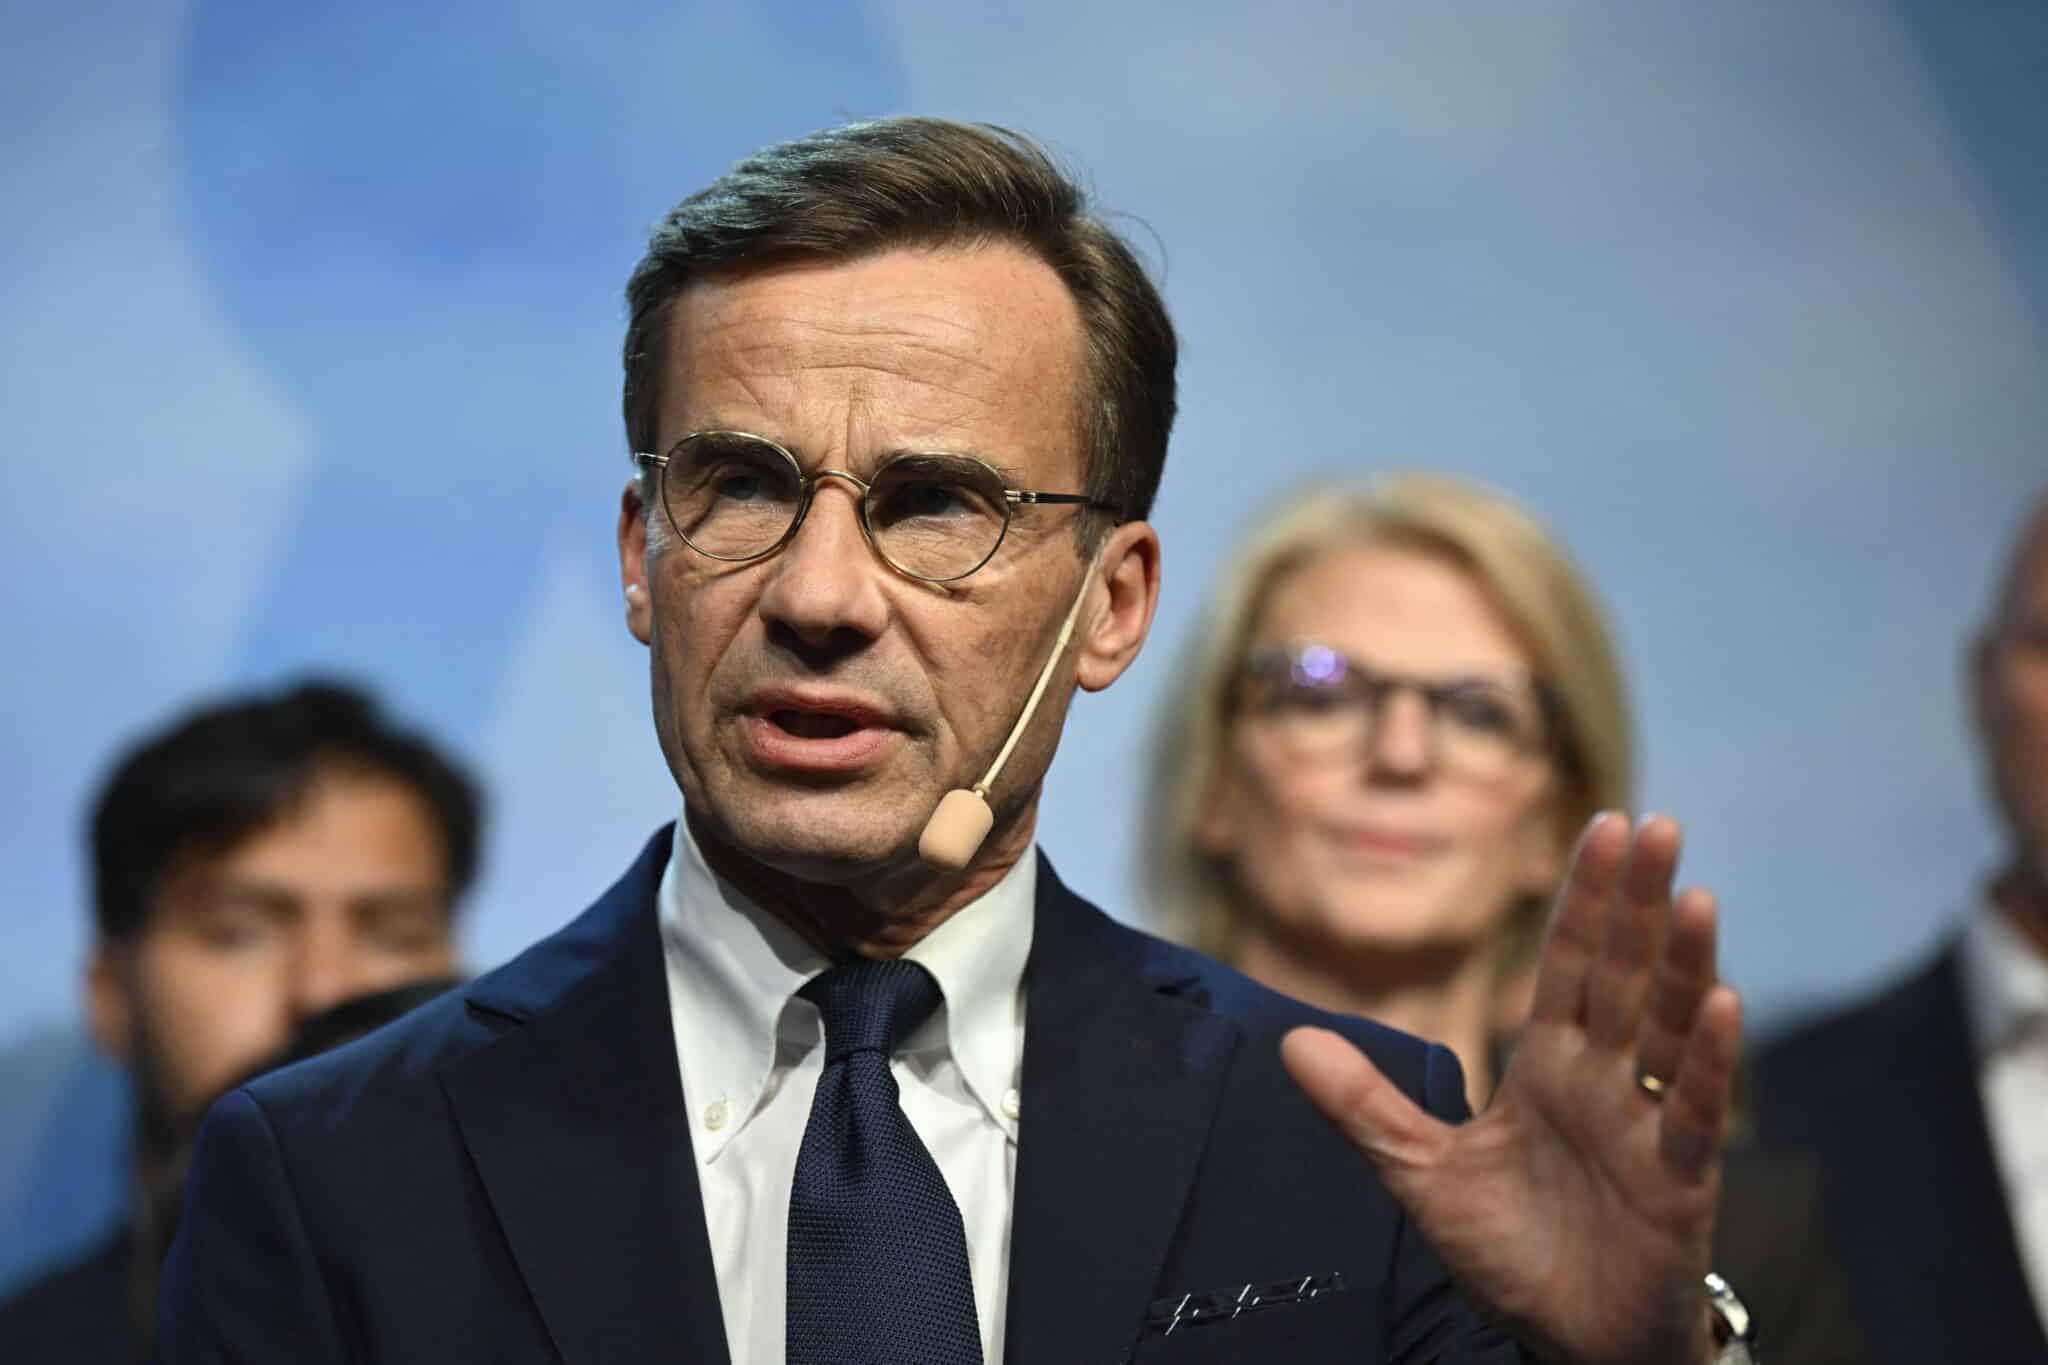 Sweden's Moderate party leader Ulf Kristersson addresses supporters during his conservative Moderate party's election party at the Clarion Sign Hotel in Stockholm, Sweden. 